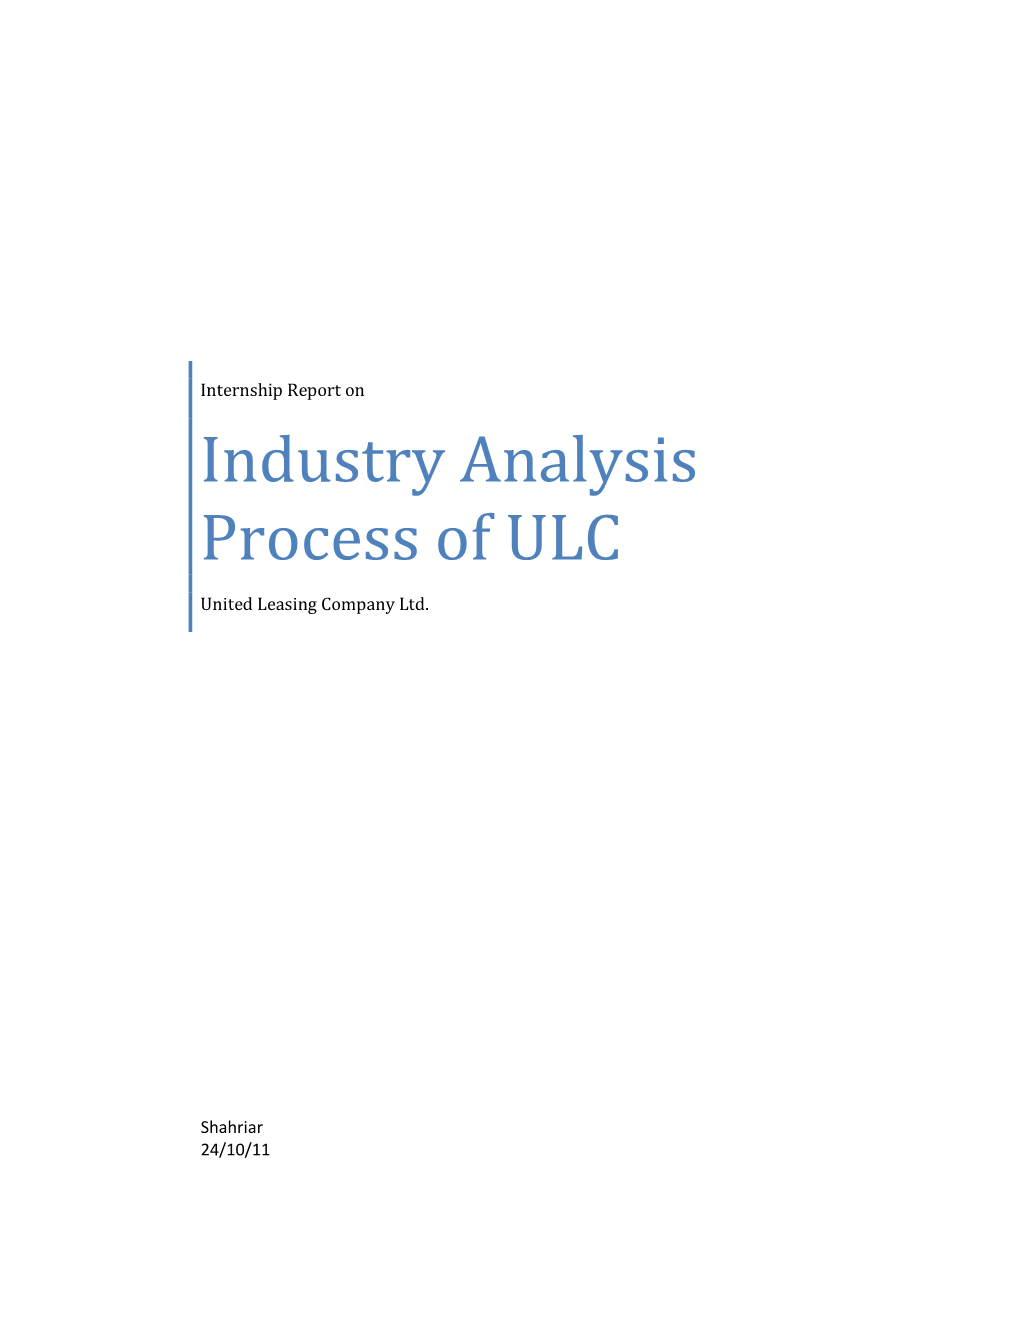 Industry Analysis Process of ULC